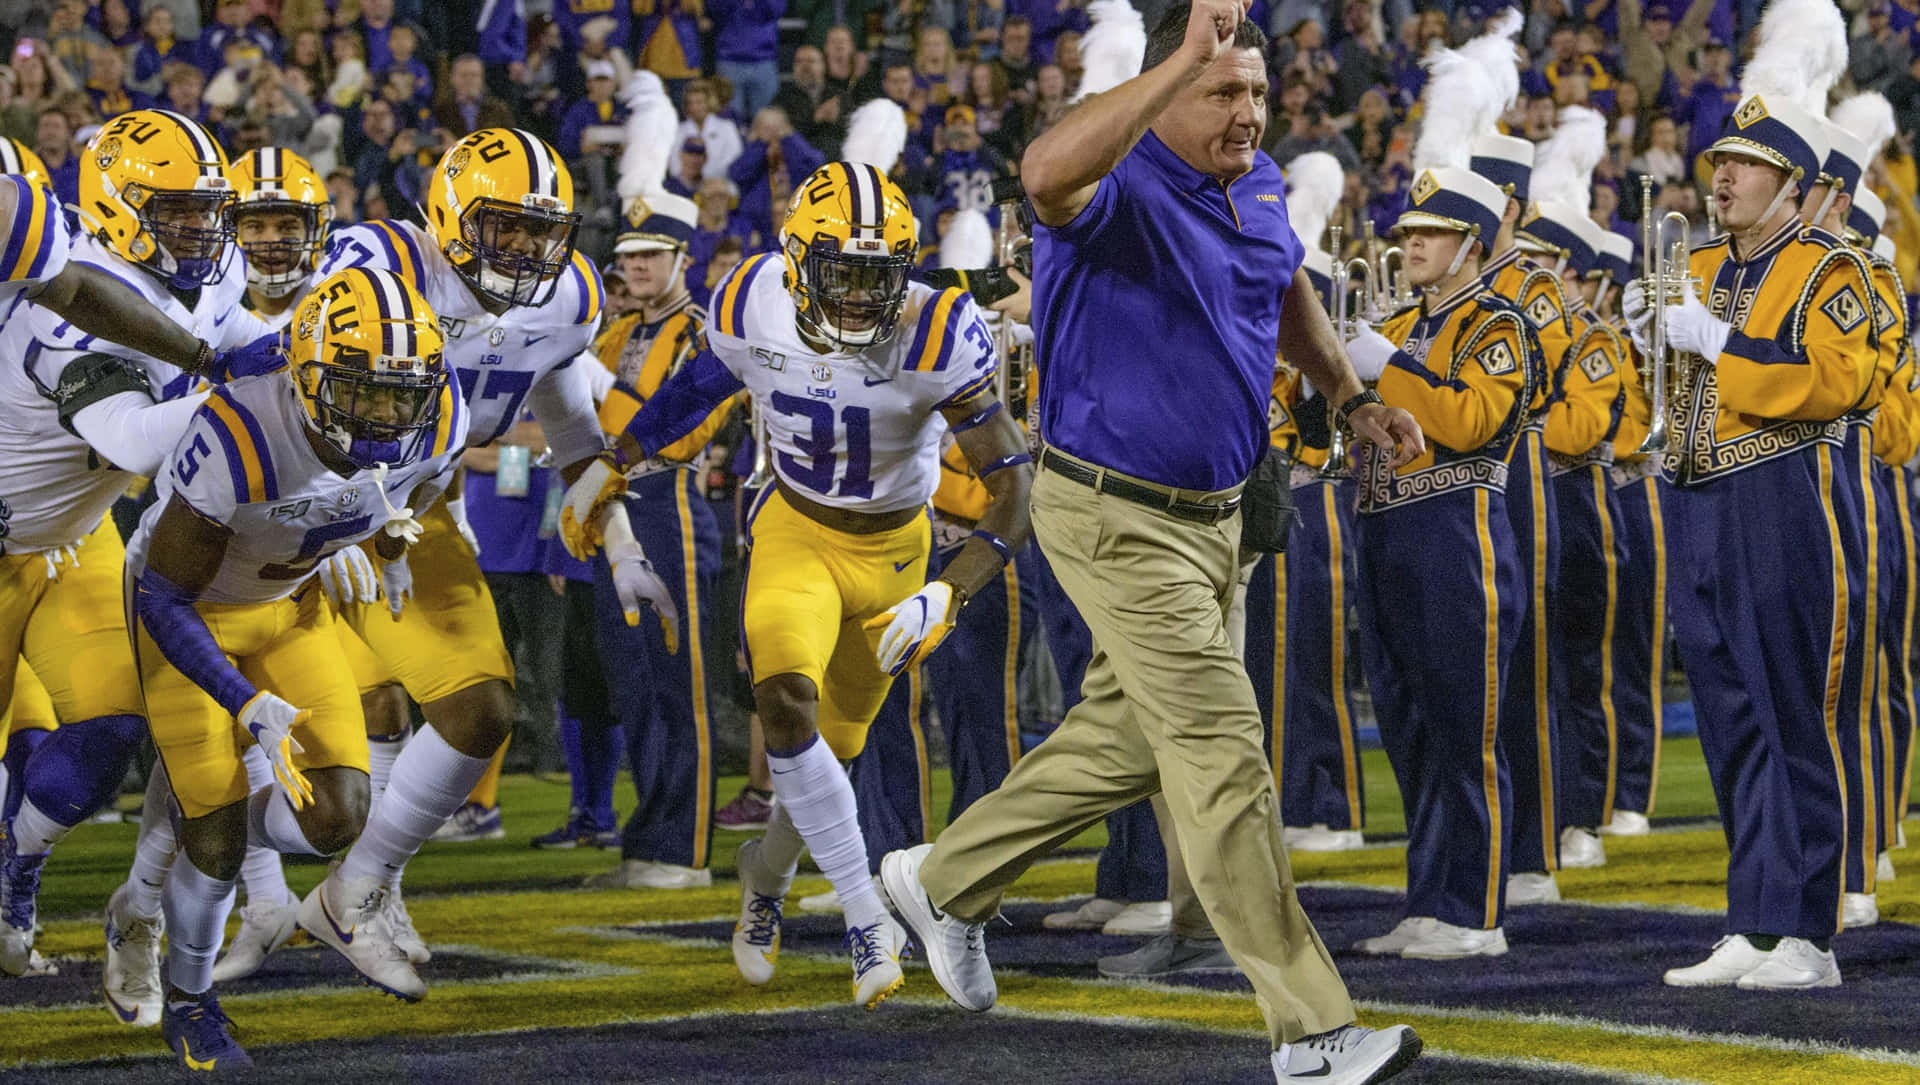 Lsu Football With Coach Wallpaper